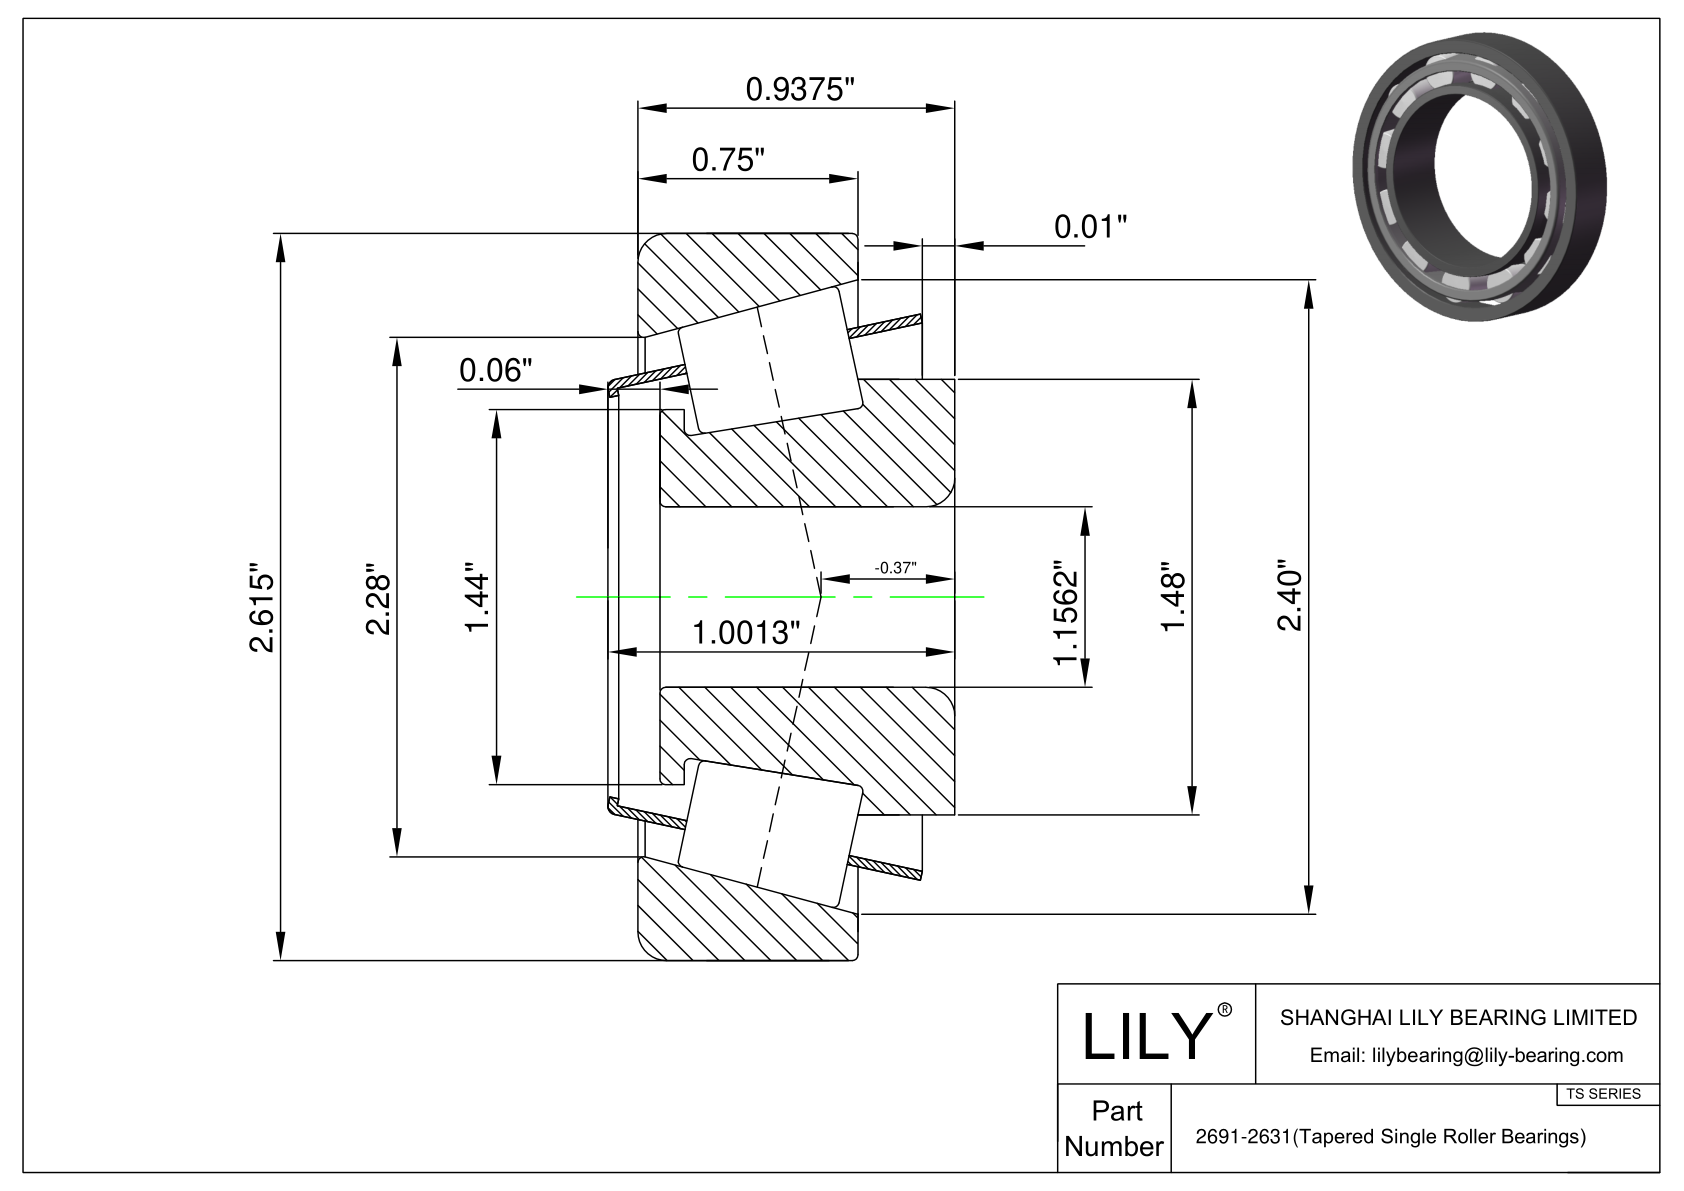 2691-2631 TS (Tapered Single Roller Bearings) (Imperial) cad drawing